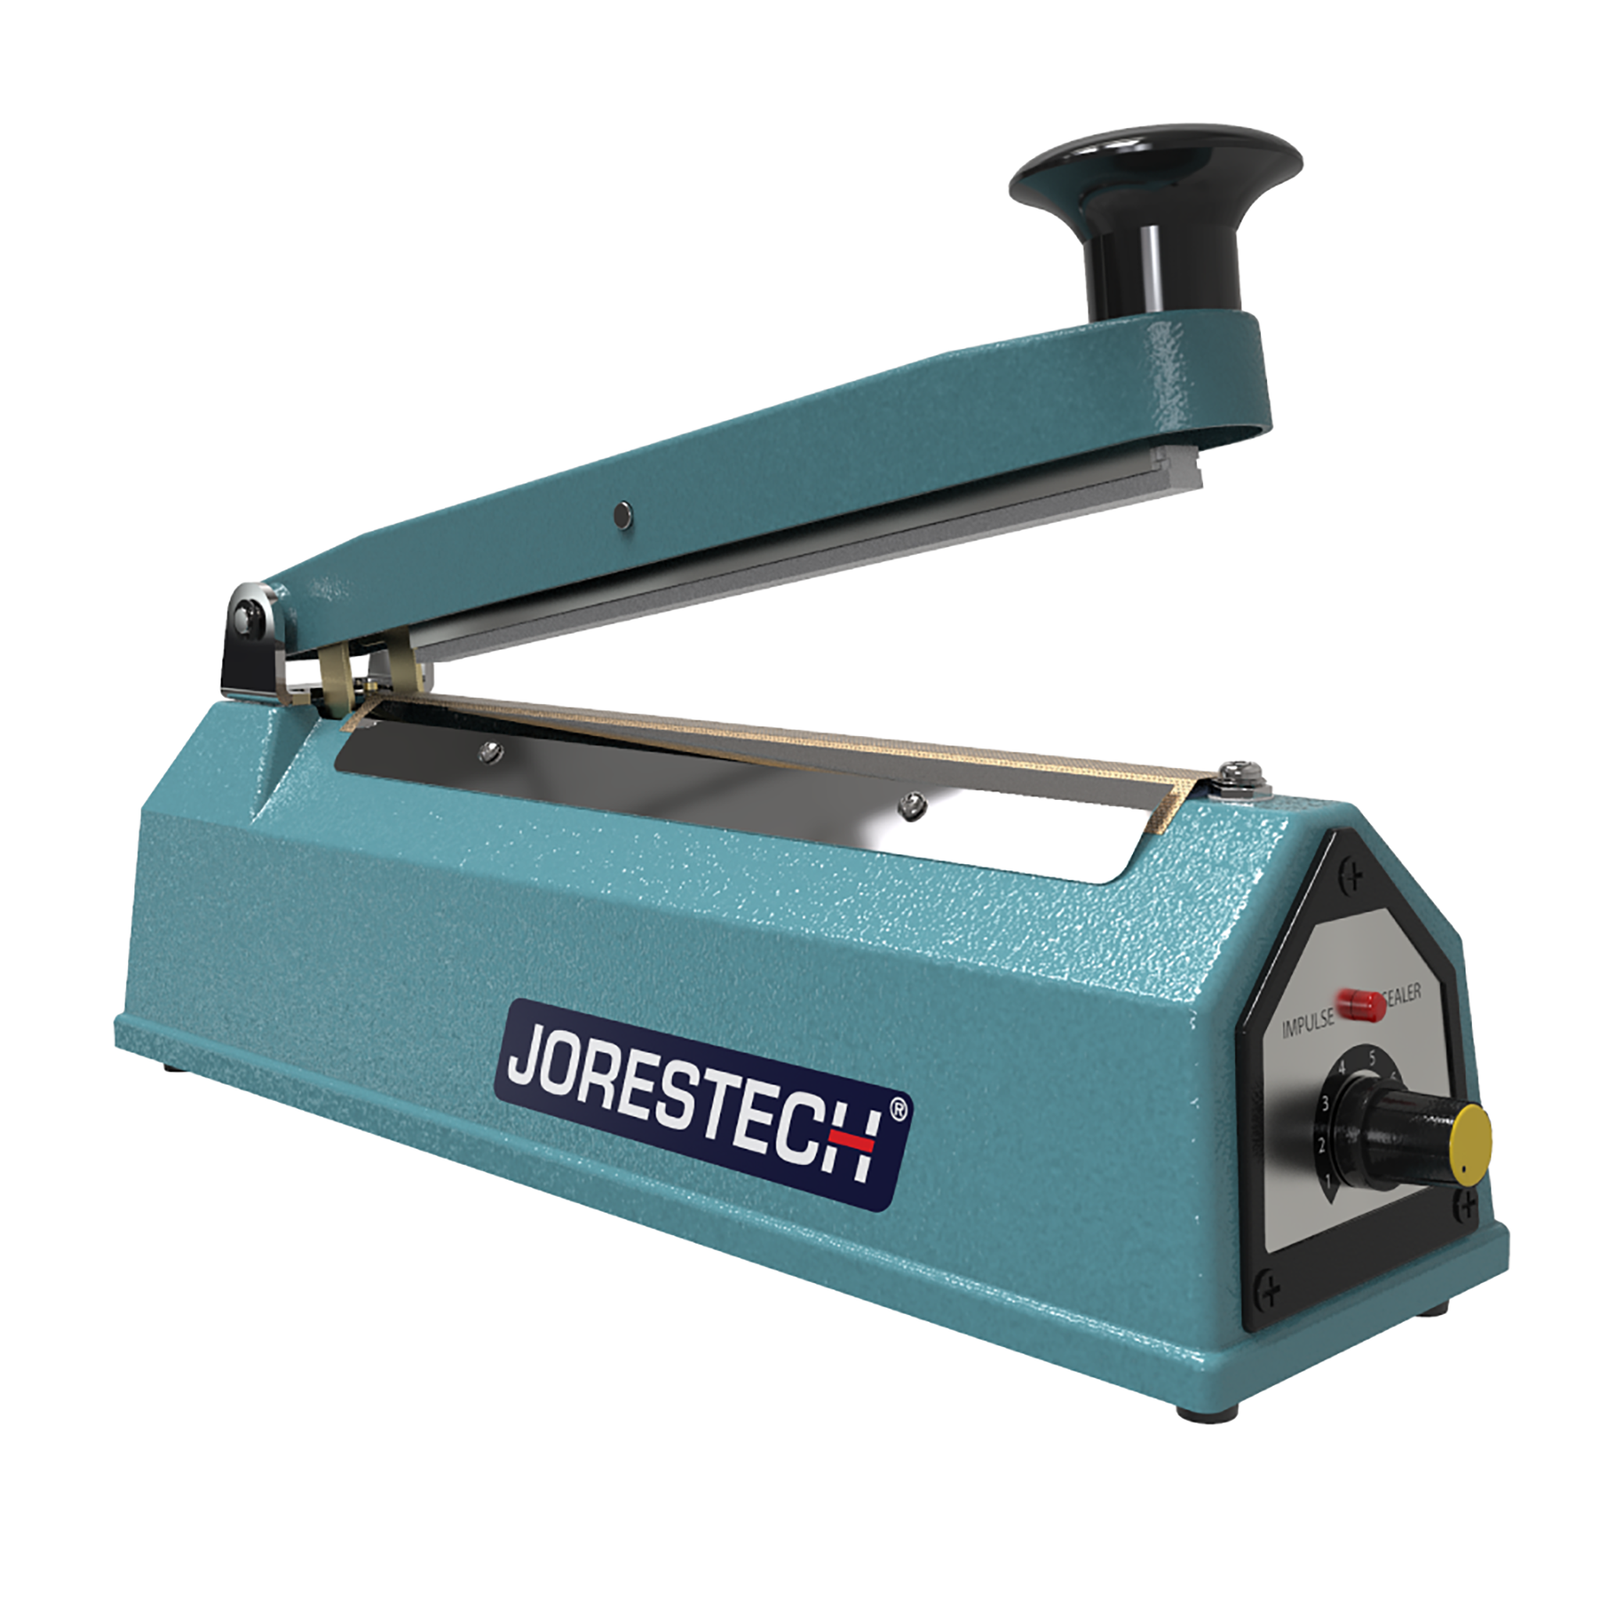 8 inch manual impulse bag sealer machine. Machine is shown with open jaw and JORES TECHNOLOGIES® logo